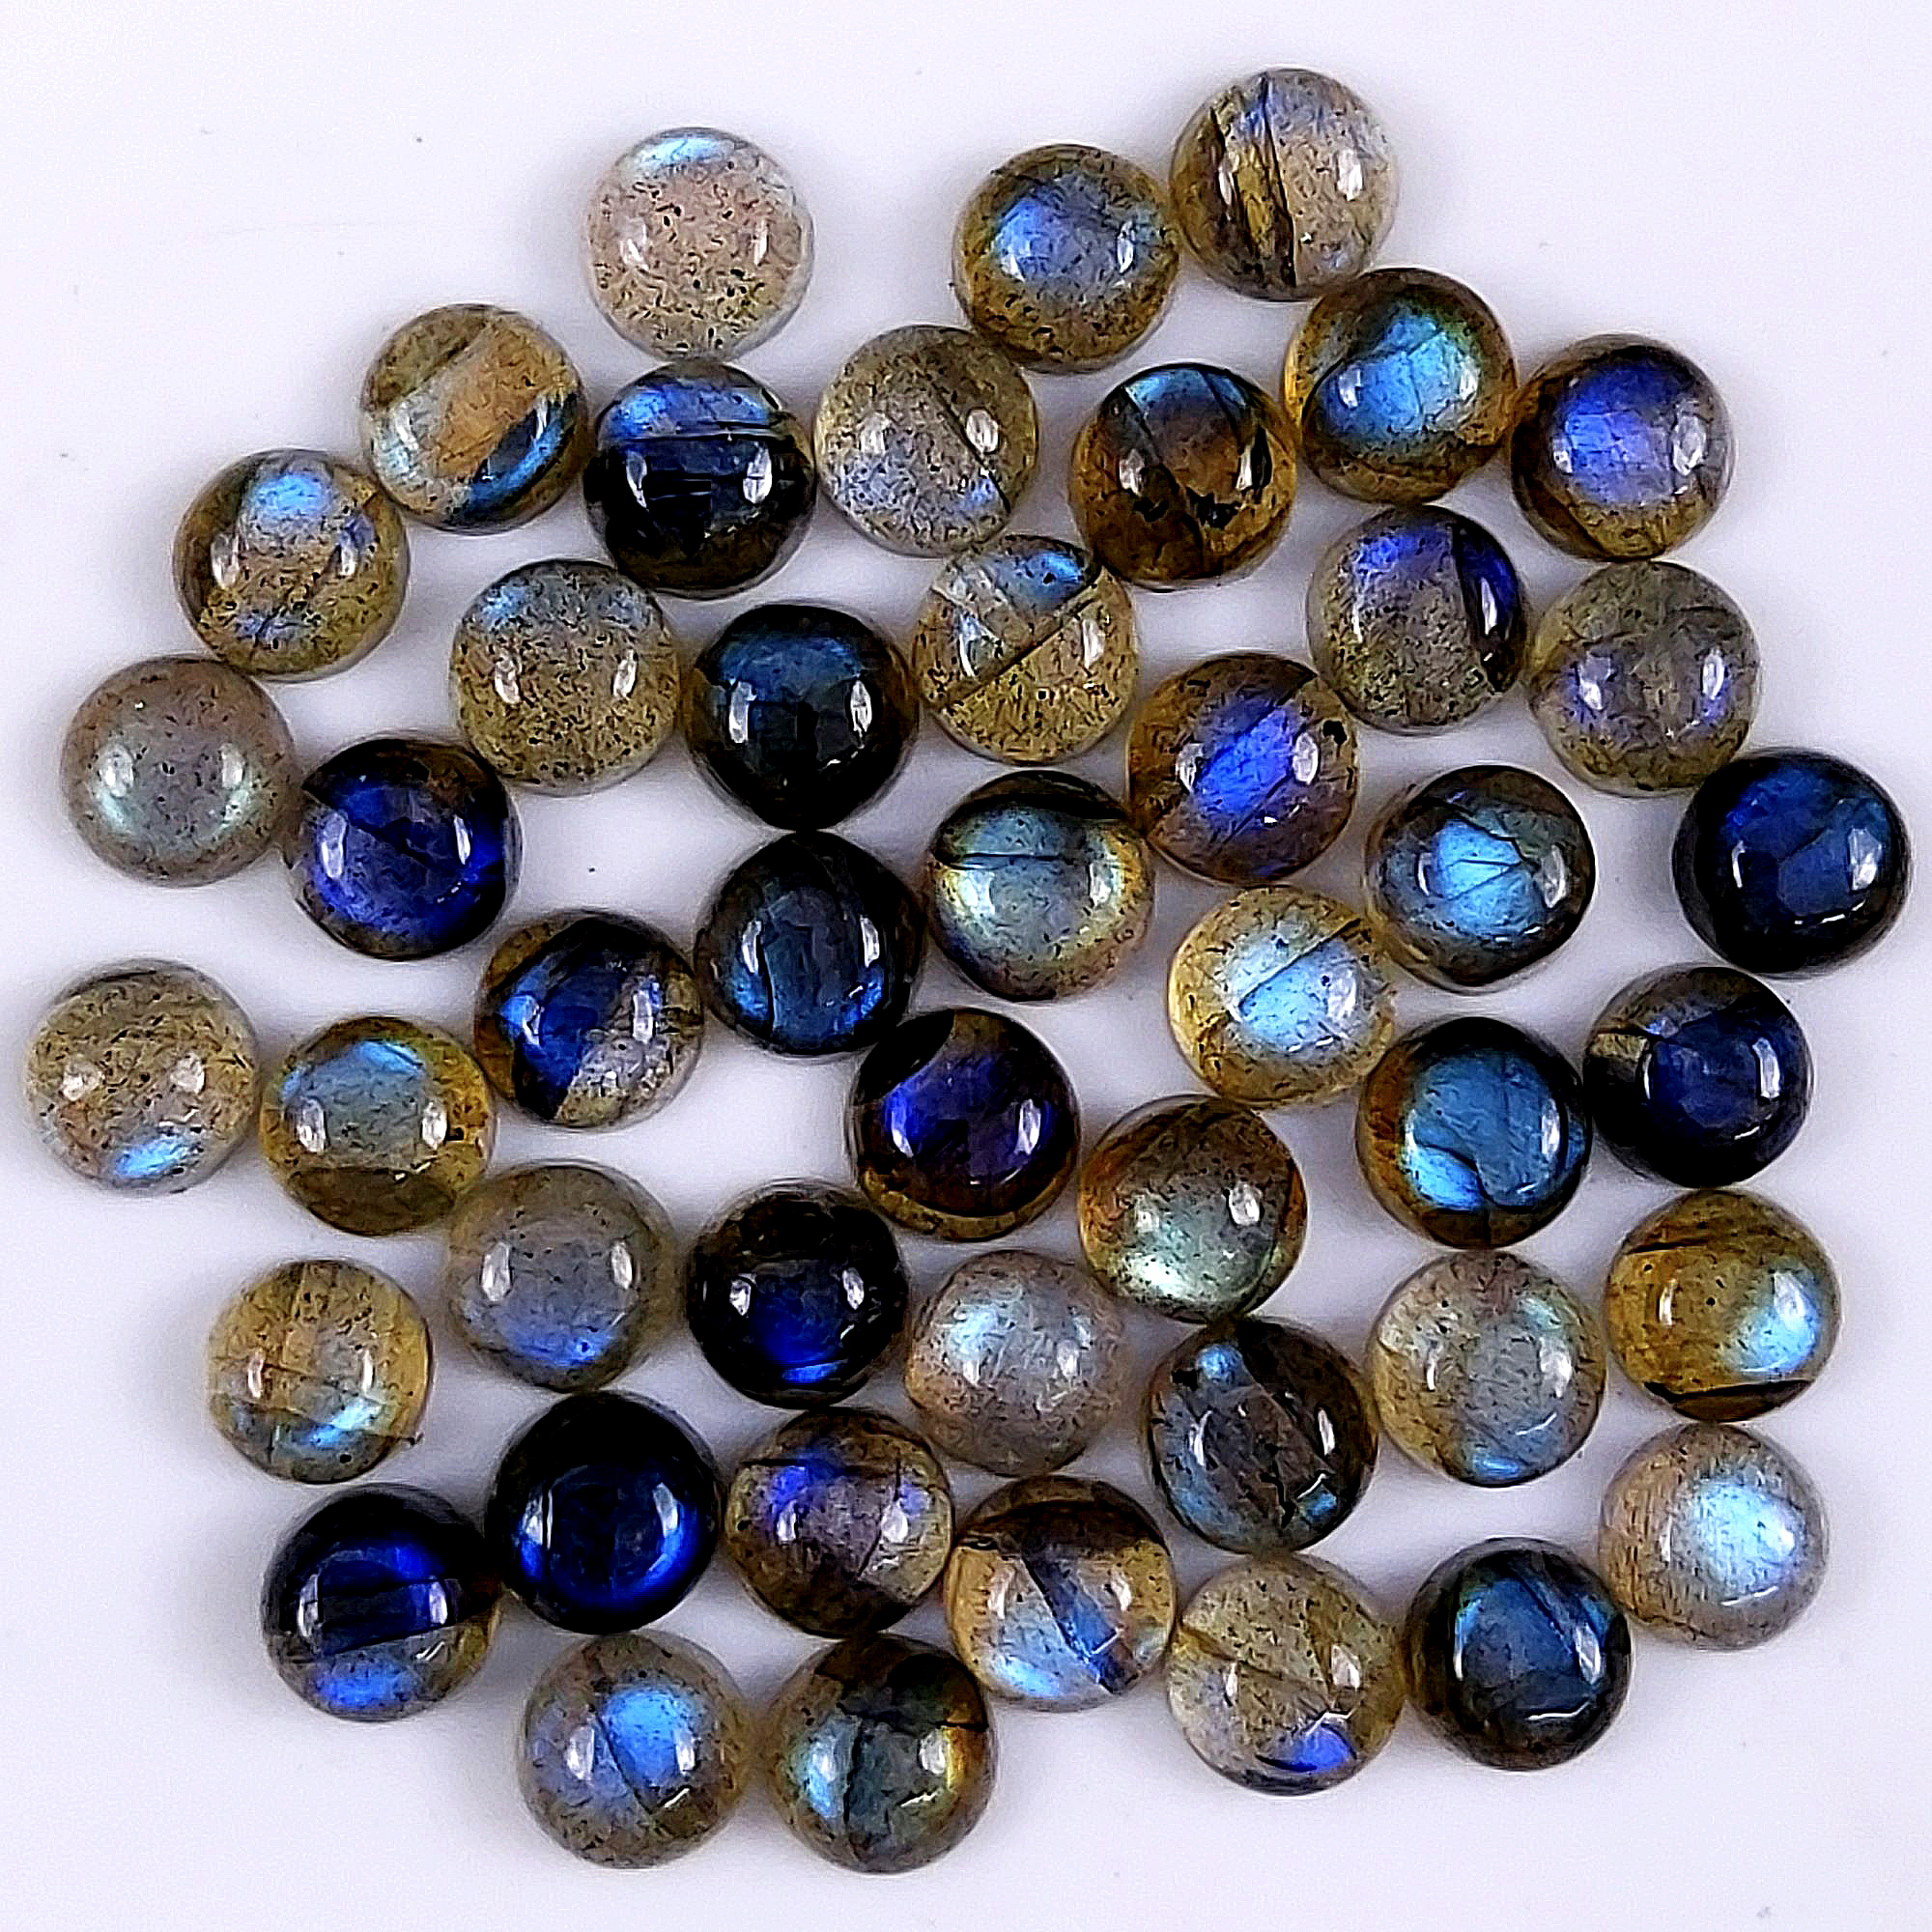 46 Pcs 61Cts Natural Labradorite Cabochon Round Shape Multifire Calibrated Loose Gemstone for jewelry making Wholesale Lots Size6.5x6.5mm#G-1577